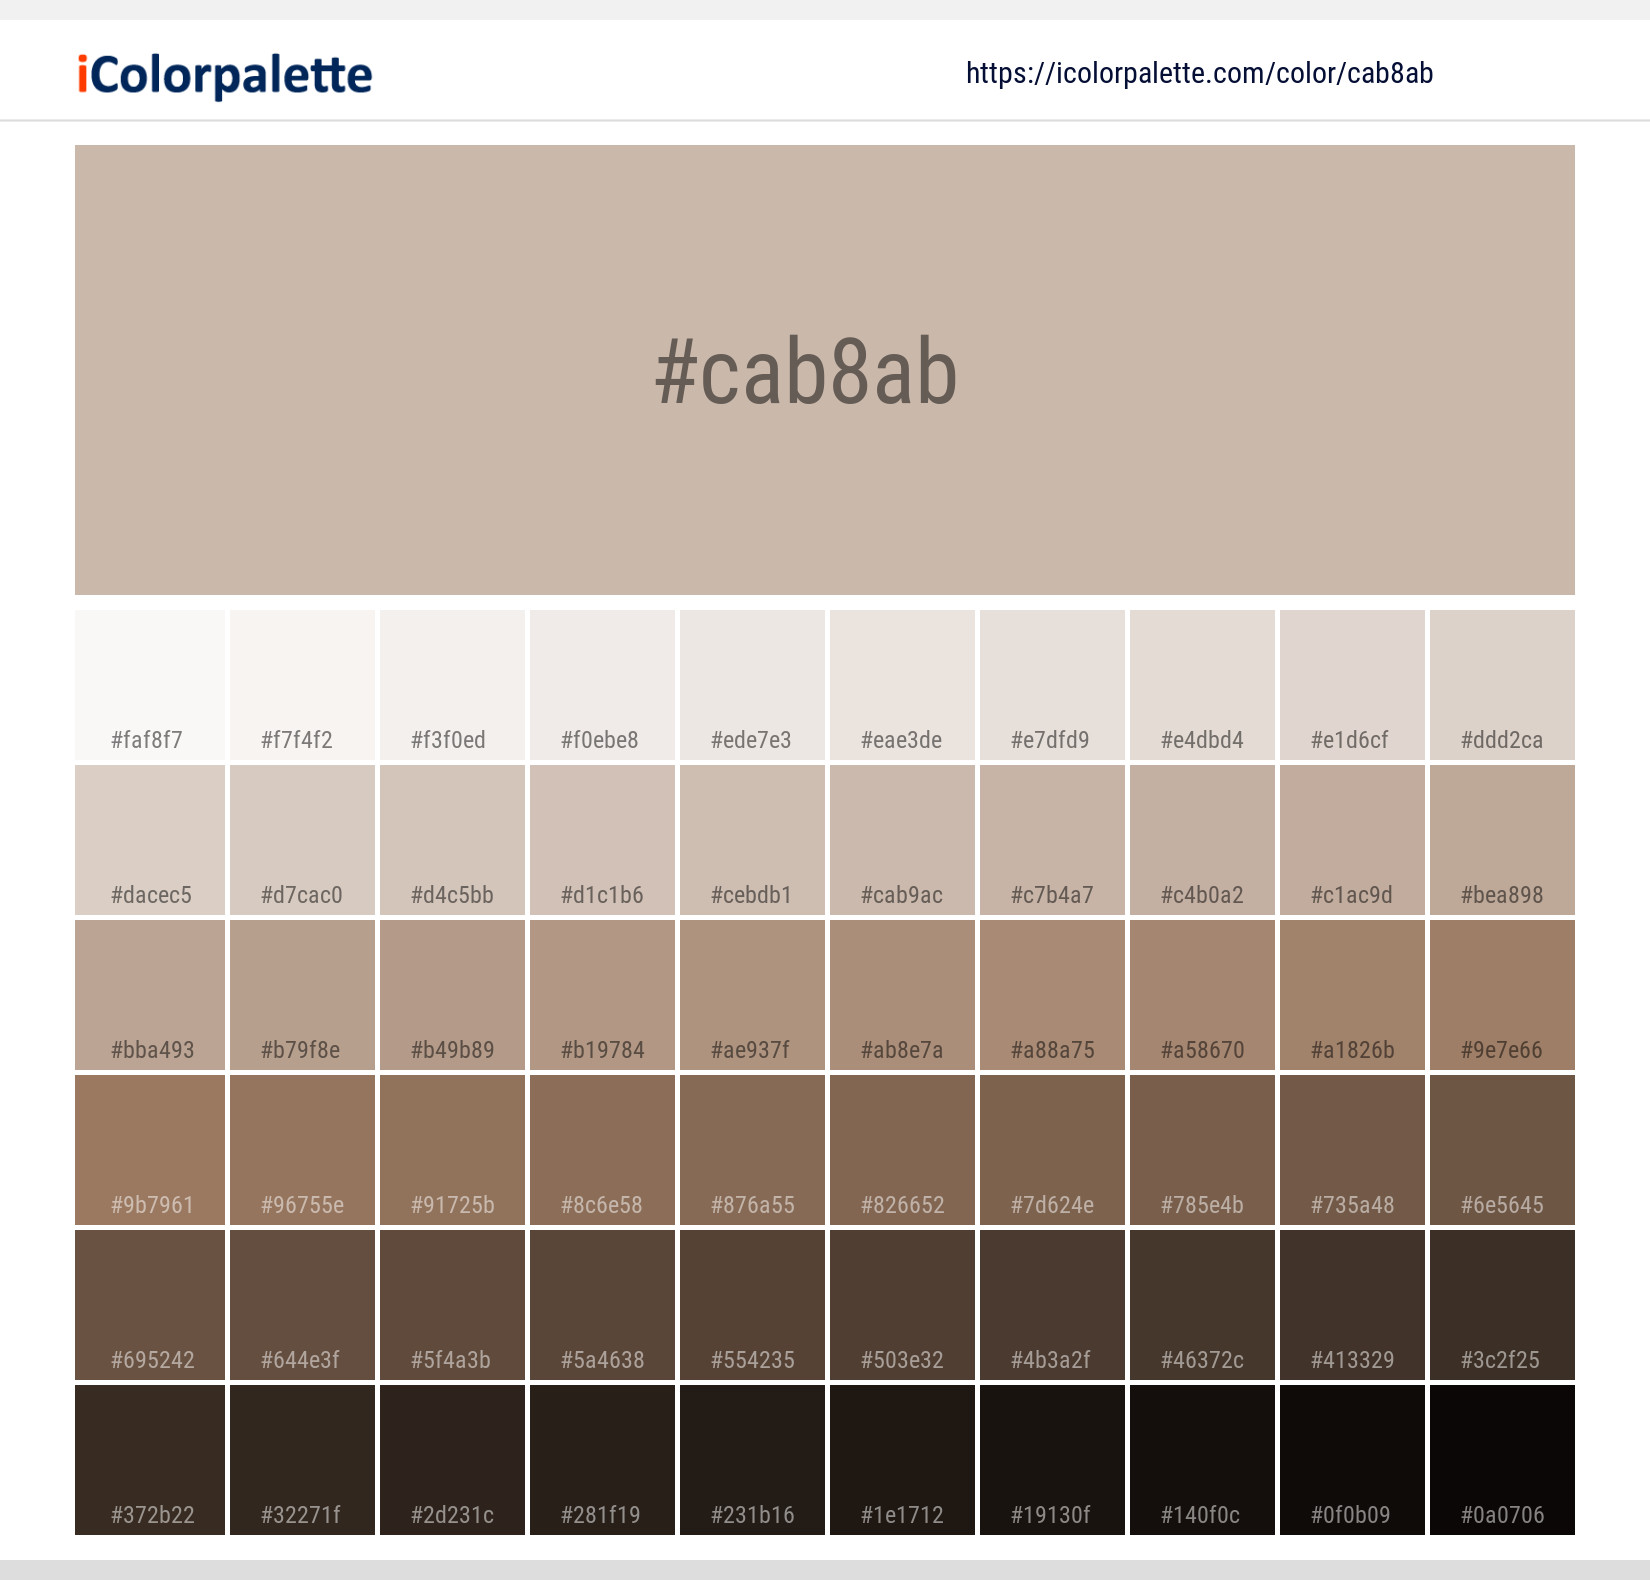 https://www.icolorpalette.com/download/shades/cab8ab_color_shades.jpg